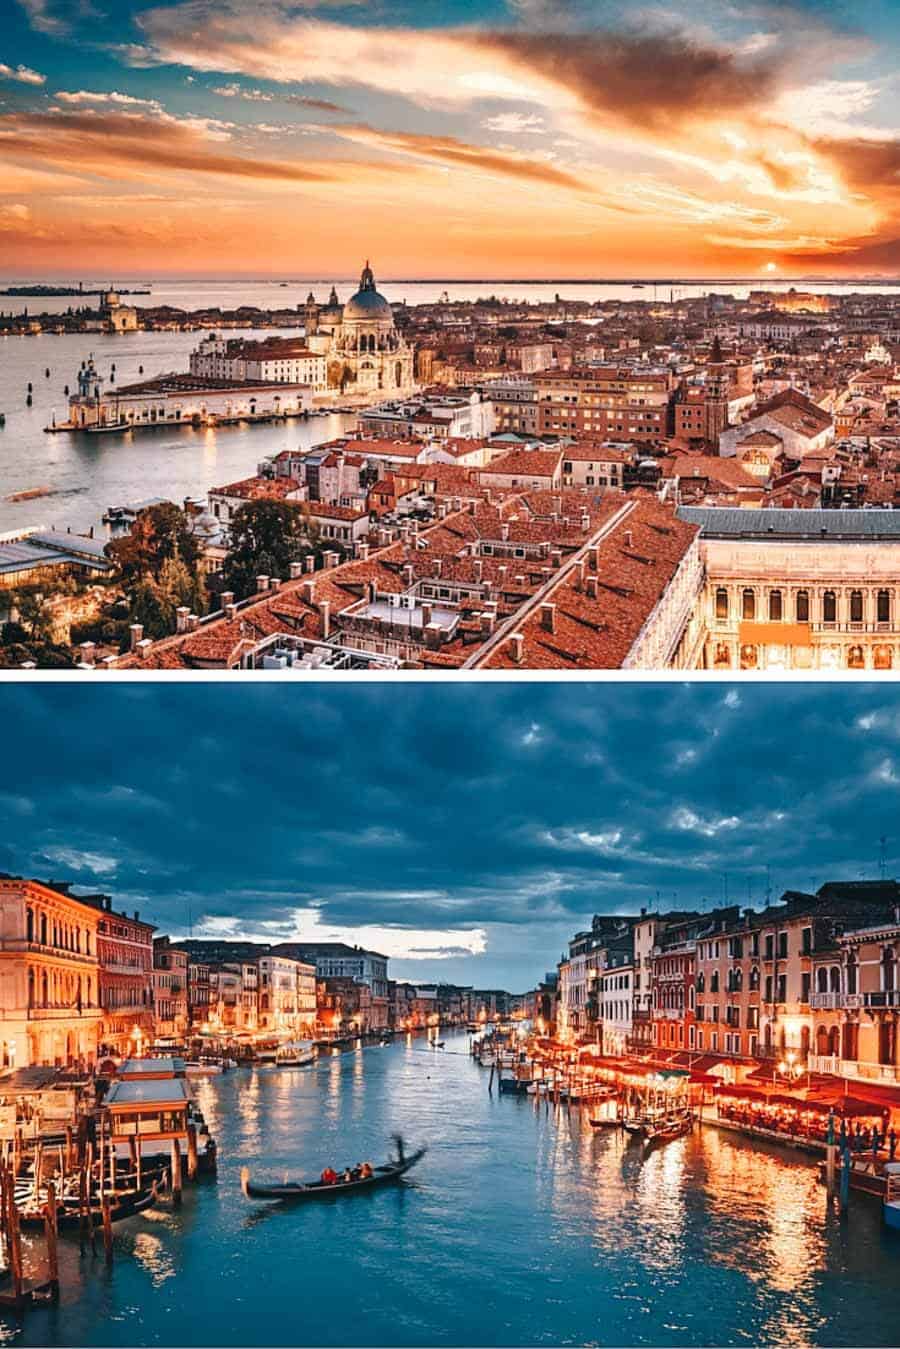 12 Best Cities in Italy to Visit This Year! Of course Venice Italy made the top of our list. Check out the 12 other best cities in Italy on www.avenlylane.com #AVENLYLANE #AVENLYLANETRAVEL #italy #italyvacations #venice #veniceitaly #beautifulplaces #travelinspiration